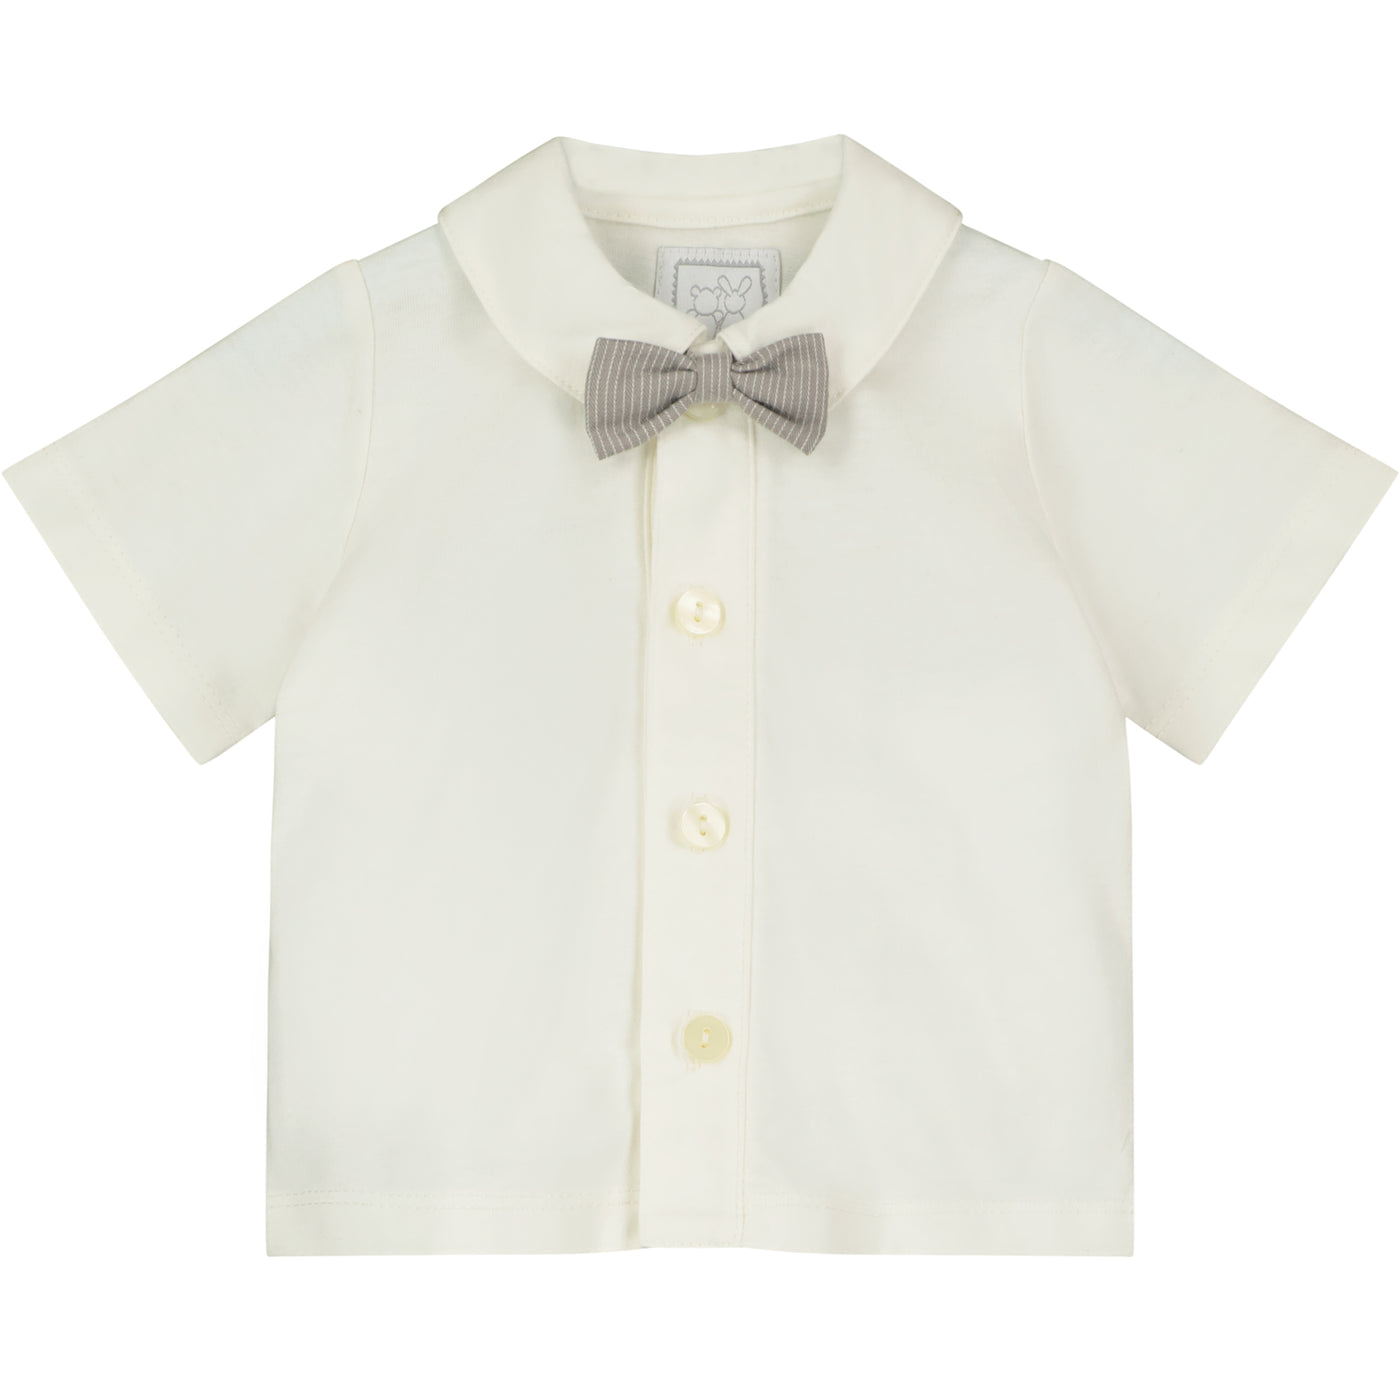 Franco Mink Smart Baby Boys Outfit